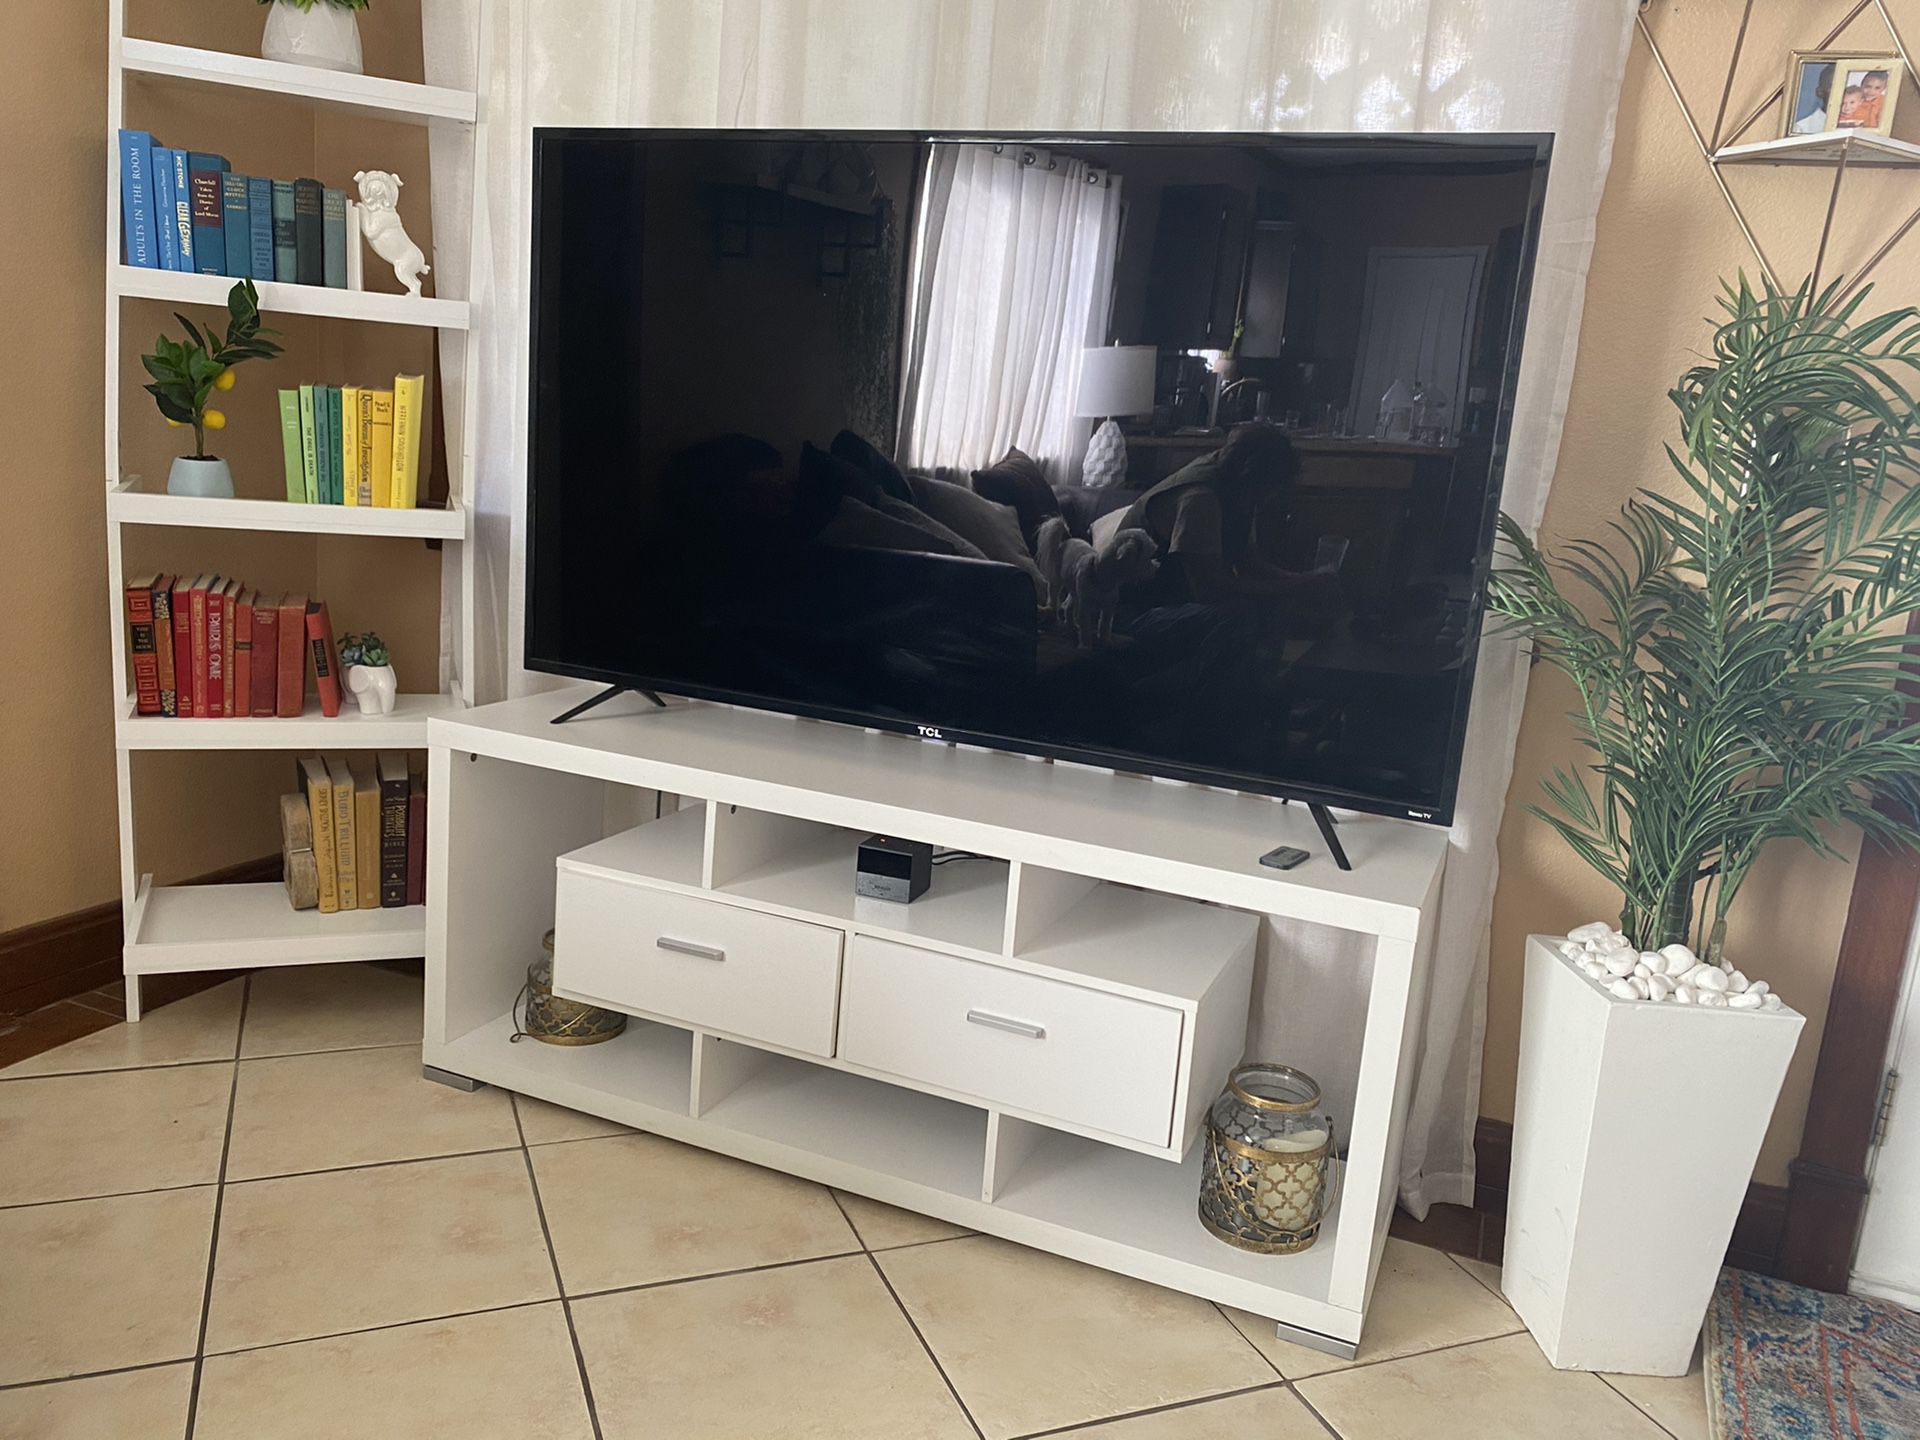 TV stand and book shelf